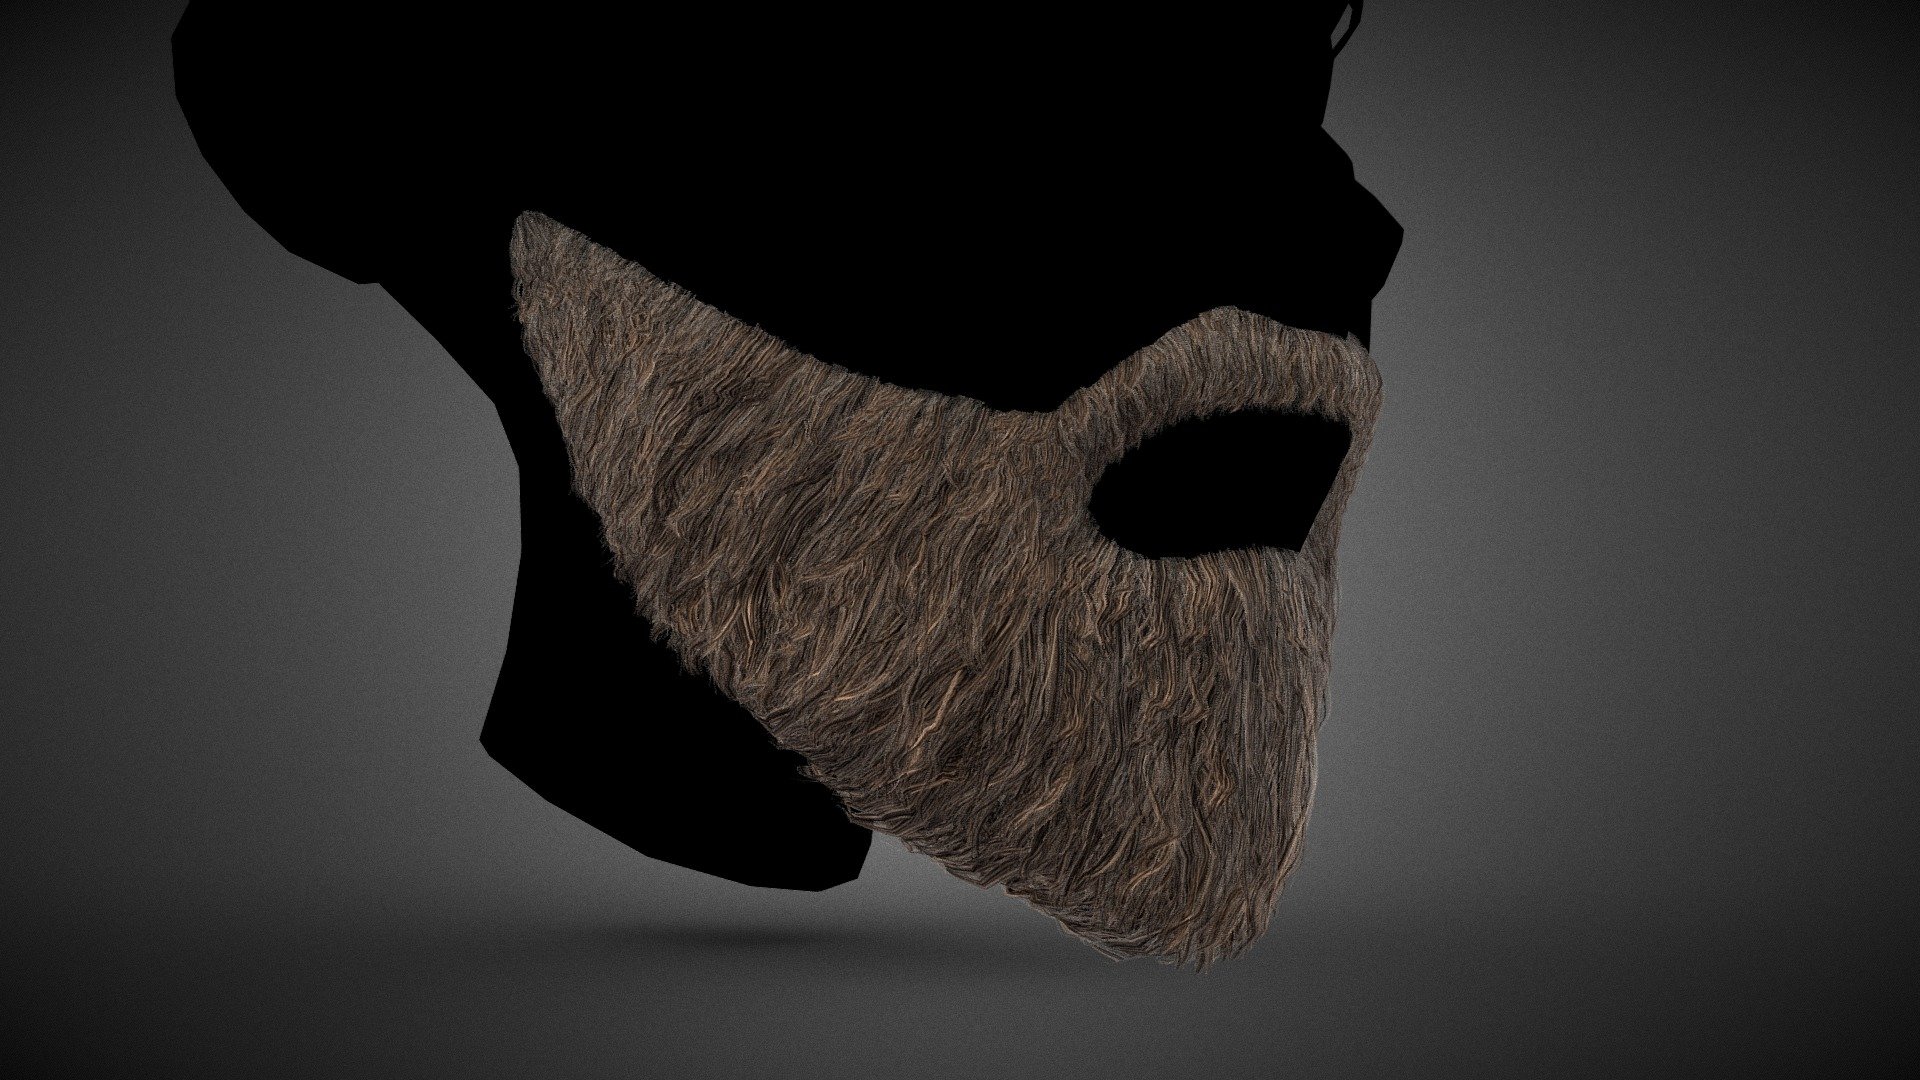 CG StudioX Present :
Facial Hair Cards Style 2 - Full Beard 2 lowpoly/PBR


The photo been rendered using Marmoset Toolbag 4 (real time game engine )
The head model is decimated to show how the hair looks on the head.

Features :

Comes with Specular and Metalness PBR 4K texture .
Good topology.
Low polygon geometry.
The Model is prefect for game for both Specular workflow as in Unity and Metalness as in Unreal engine .
The model also rendered using Marmoset Toolbag 4 with both Specular and Metalness PBR and also included in the product with the full texture.
The texture can be easily adjustable .

Texture :

One set of UV for the Hair [Albedo -Normal-Metalness -Roughness-Gloss-Specular-Ao-Alpha-Depth-Direction-ID-Root] (4096*4096).
One set of UV for the Cap [Albedo -Normal-Metalness -Roughness-Gloss-Specular-Alpha] (4096*4096).

Files :
Marmoset Toolbag 4 ,Maya,,FBX,glTF,Blender,OBj with all the textures.


Contact me for if you have any questions.
 - Facial Hair Cards Style 2 - Full Beard 2 - Buy Royalty Free 3D model by CG StudioX (@CG_StudioX) 3d model